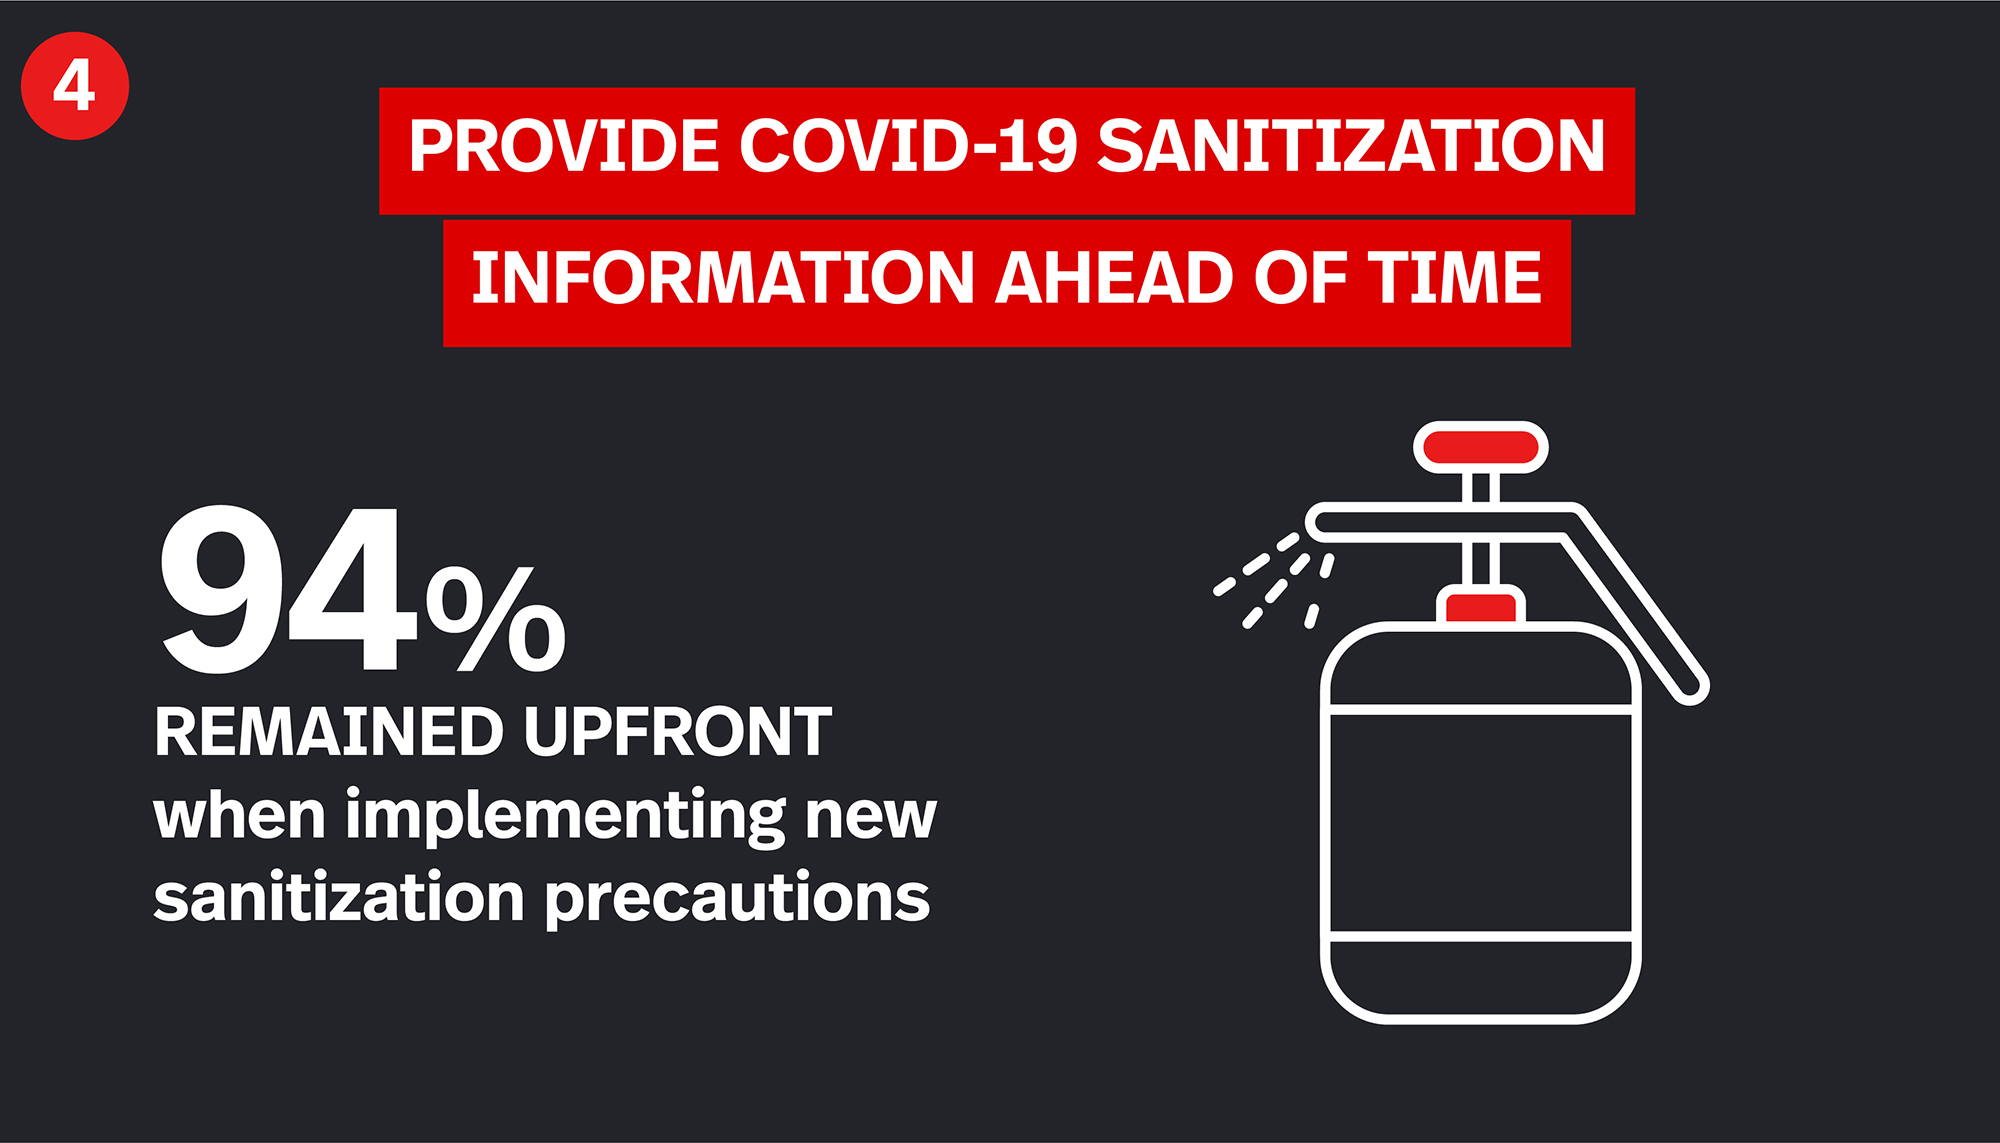  Illustration on the importance of providing COVID-19 sanitization information ahead of time. 